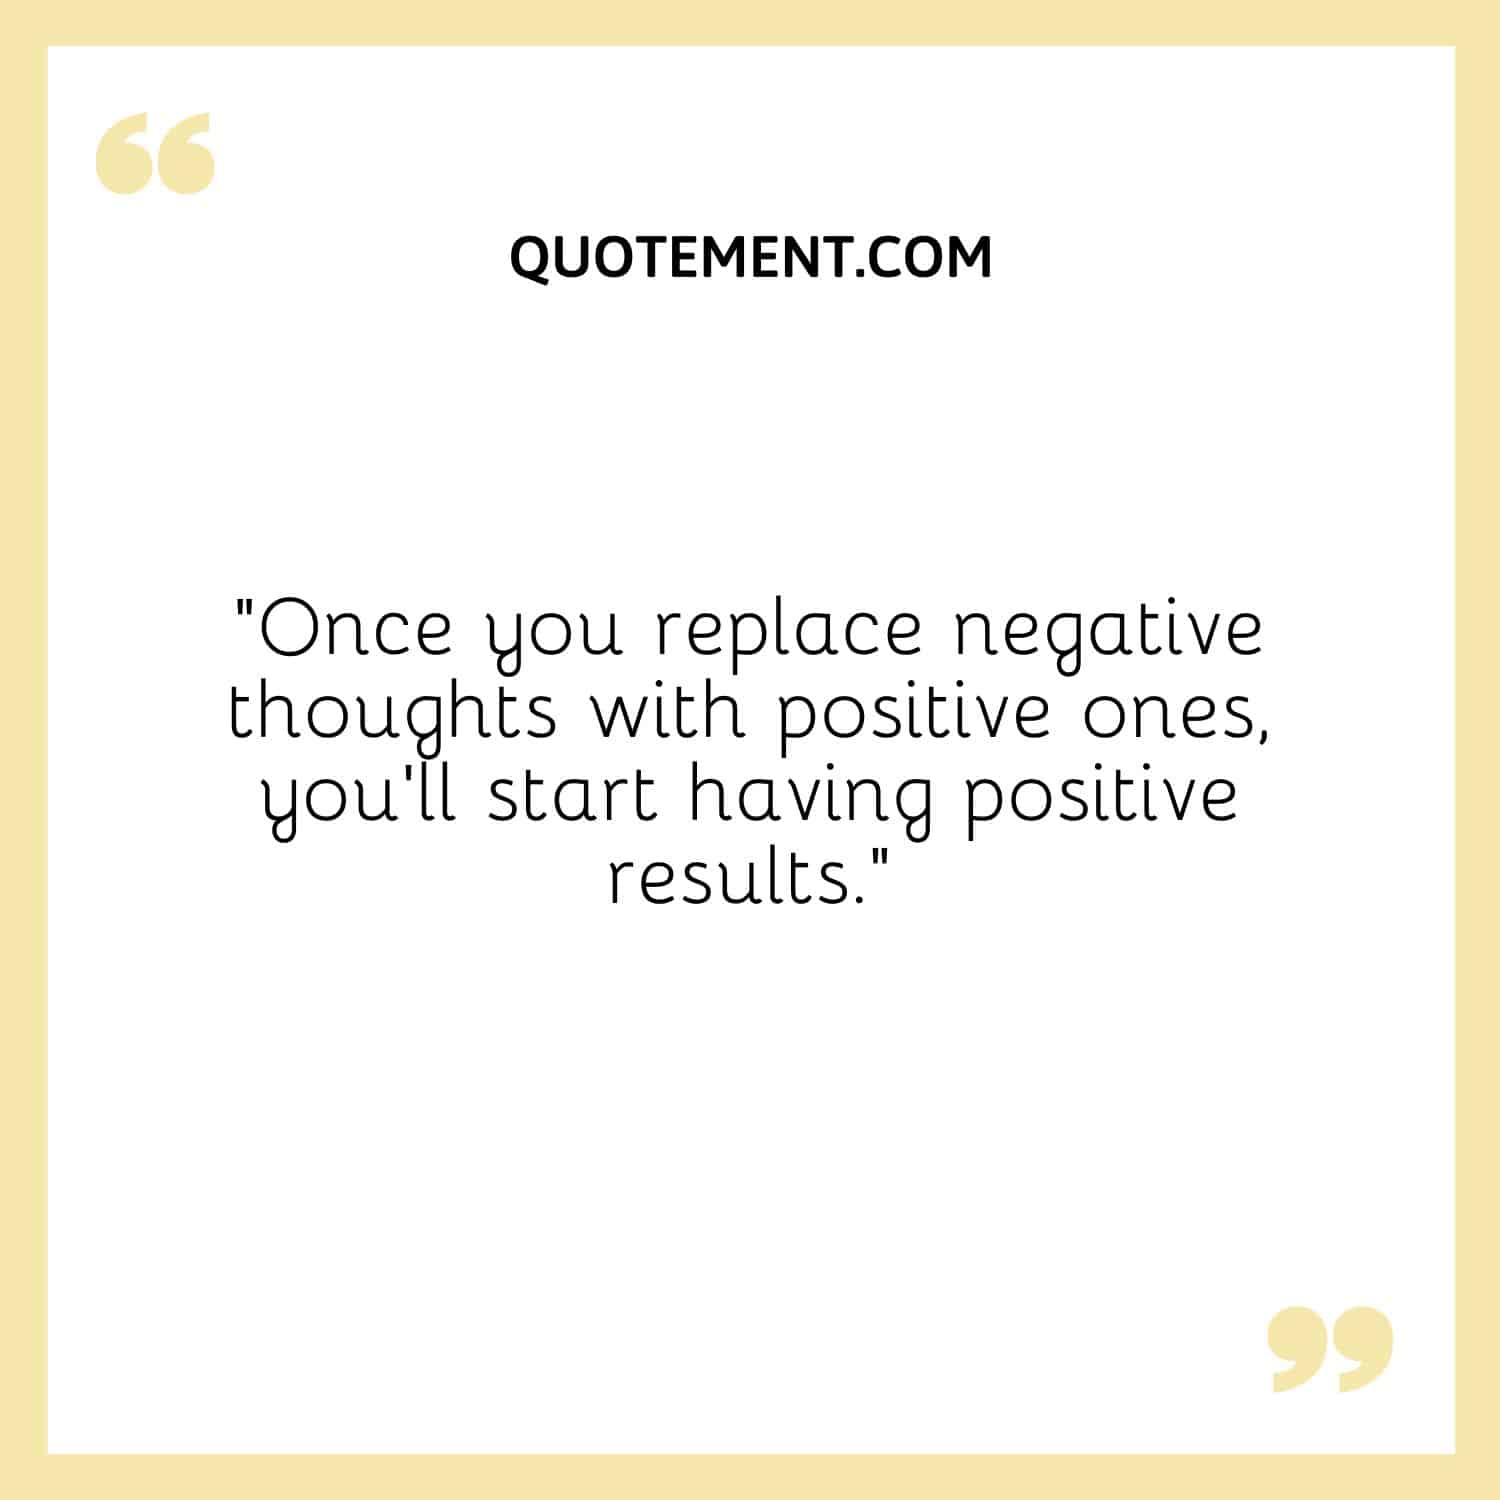 “Once you replace negative thoughts with positive ones, you’ll start having positive results.”